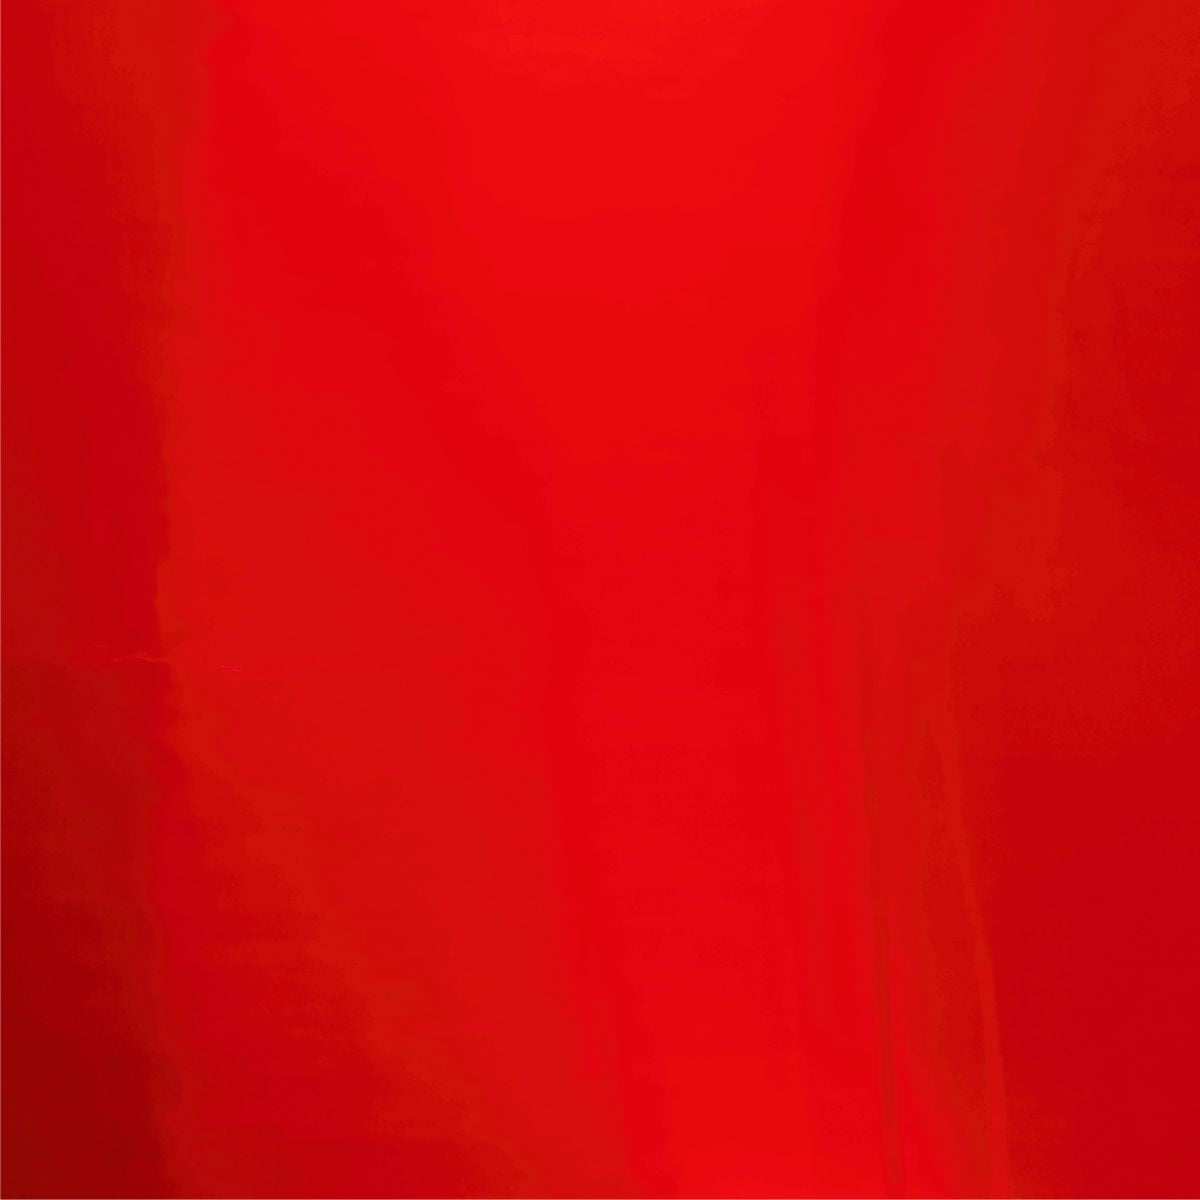 Fine Brush Cherry Red Adhesive Vinyl 12x12 Sheets (Has Line) CLEARANCE